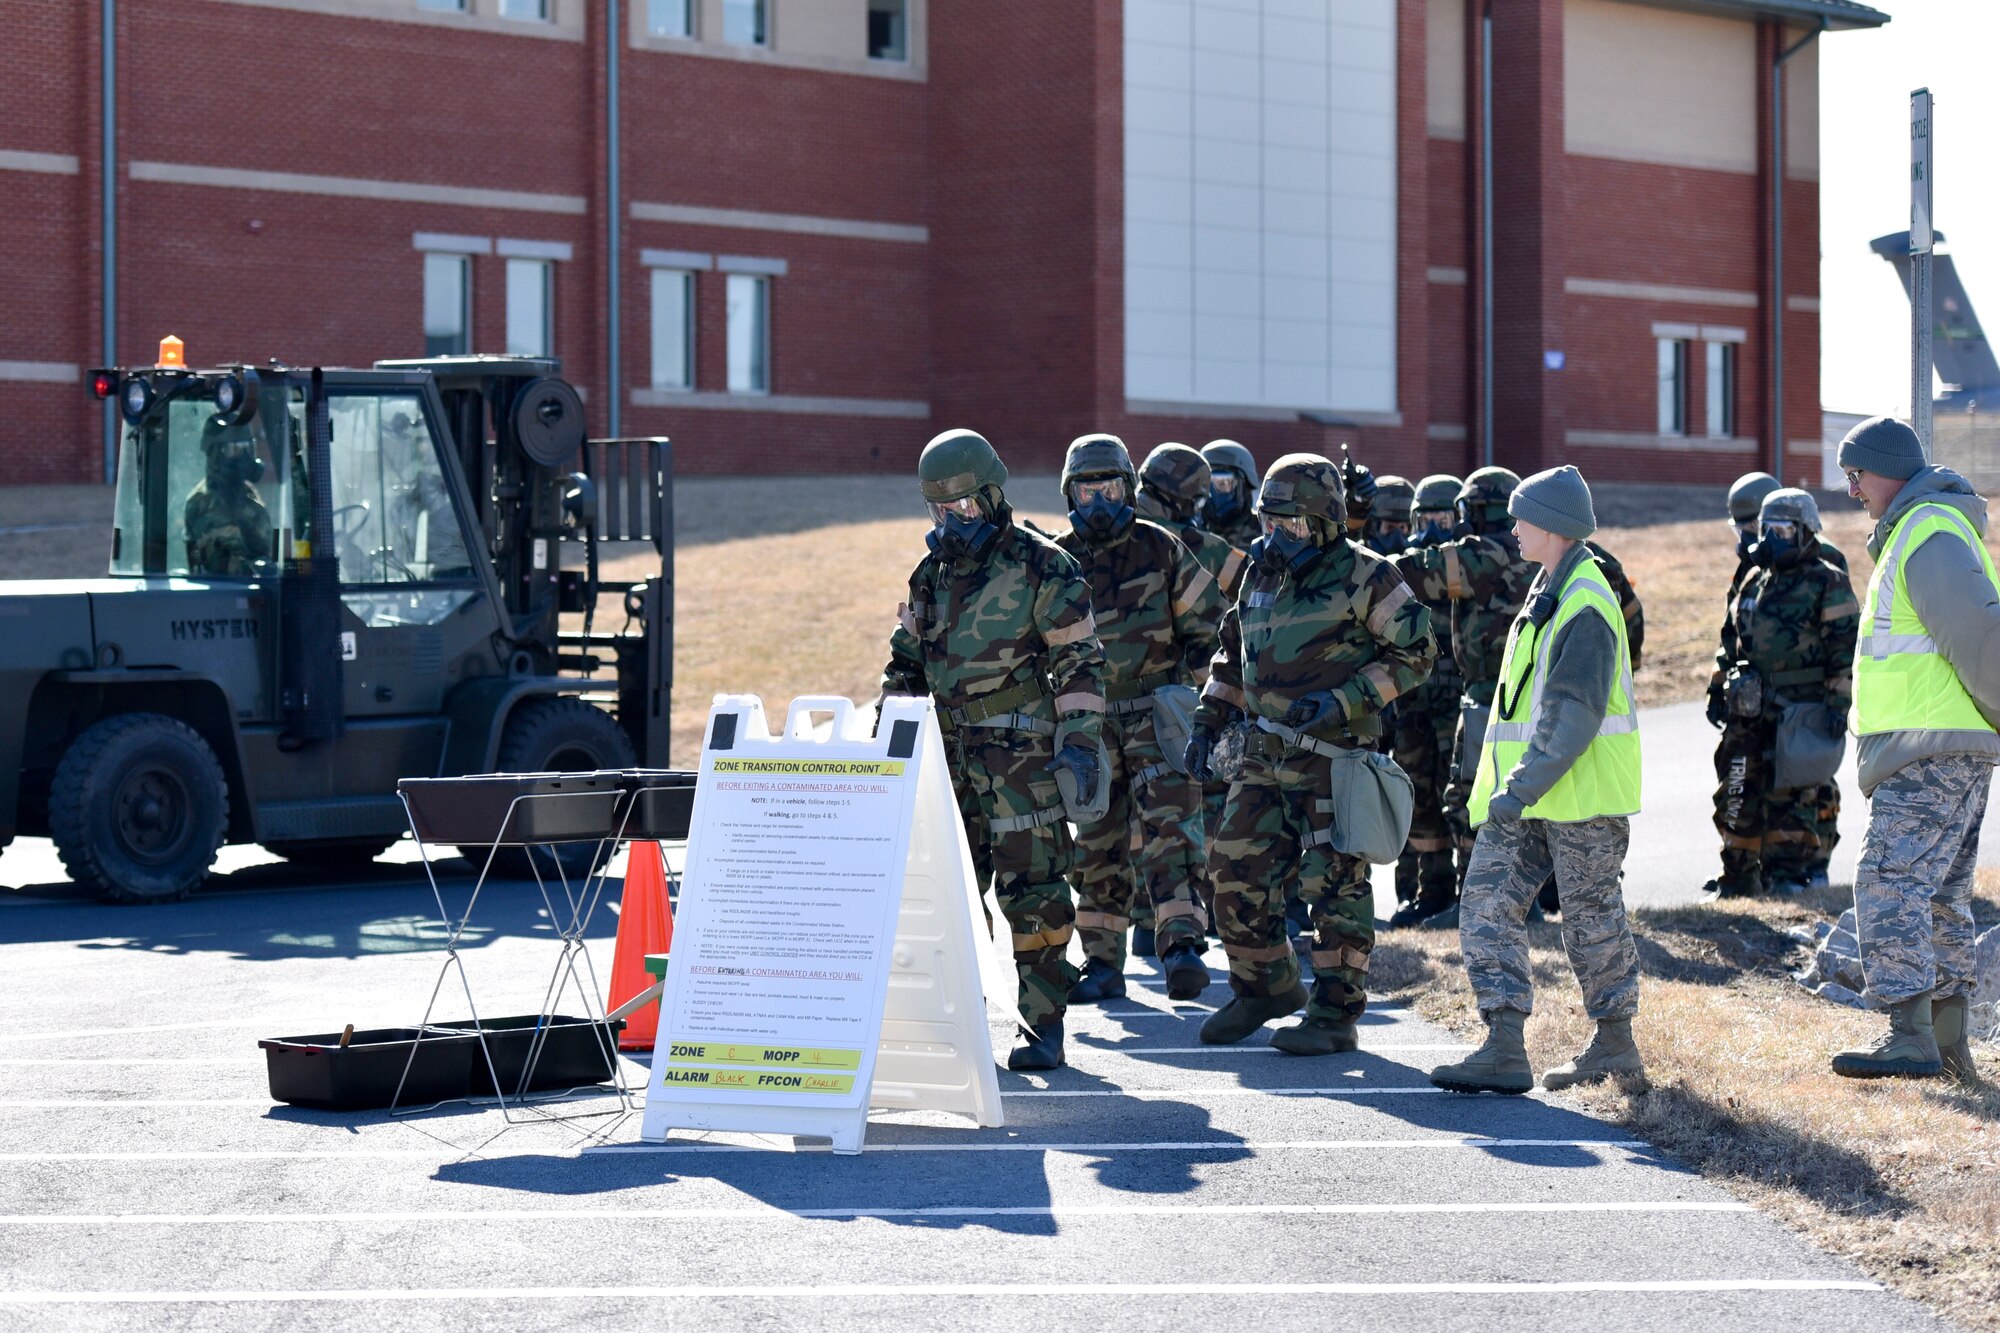 Airmen prepare to enter a zone transition control point during a readiness exercise at the 167th Airlift Wing, West Virginia Air National Guard, Feb. 3.